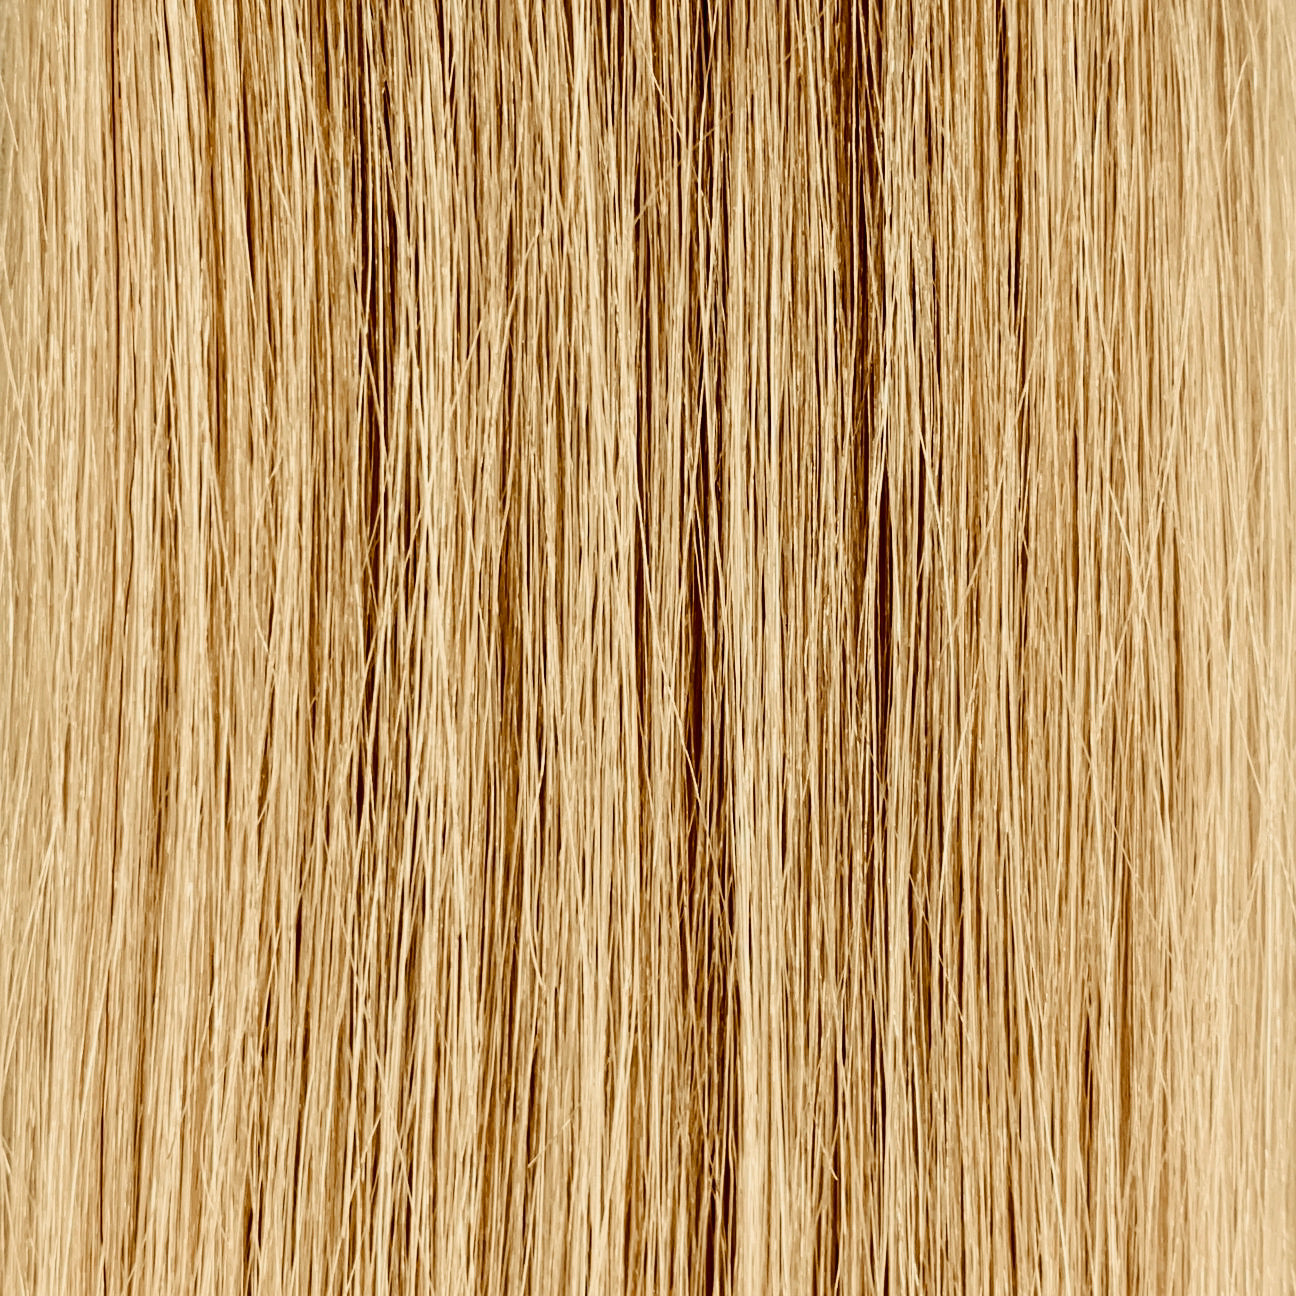 40 cm | Normal Tape Extensions | No. 14 dunkelblond-gold